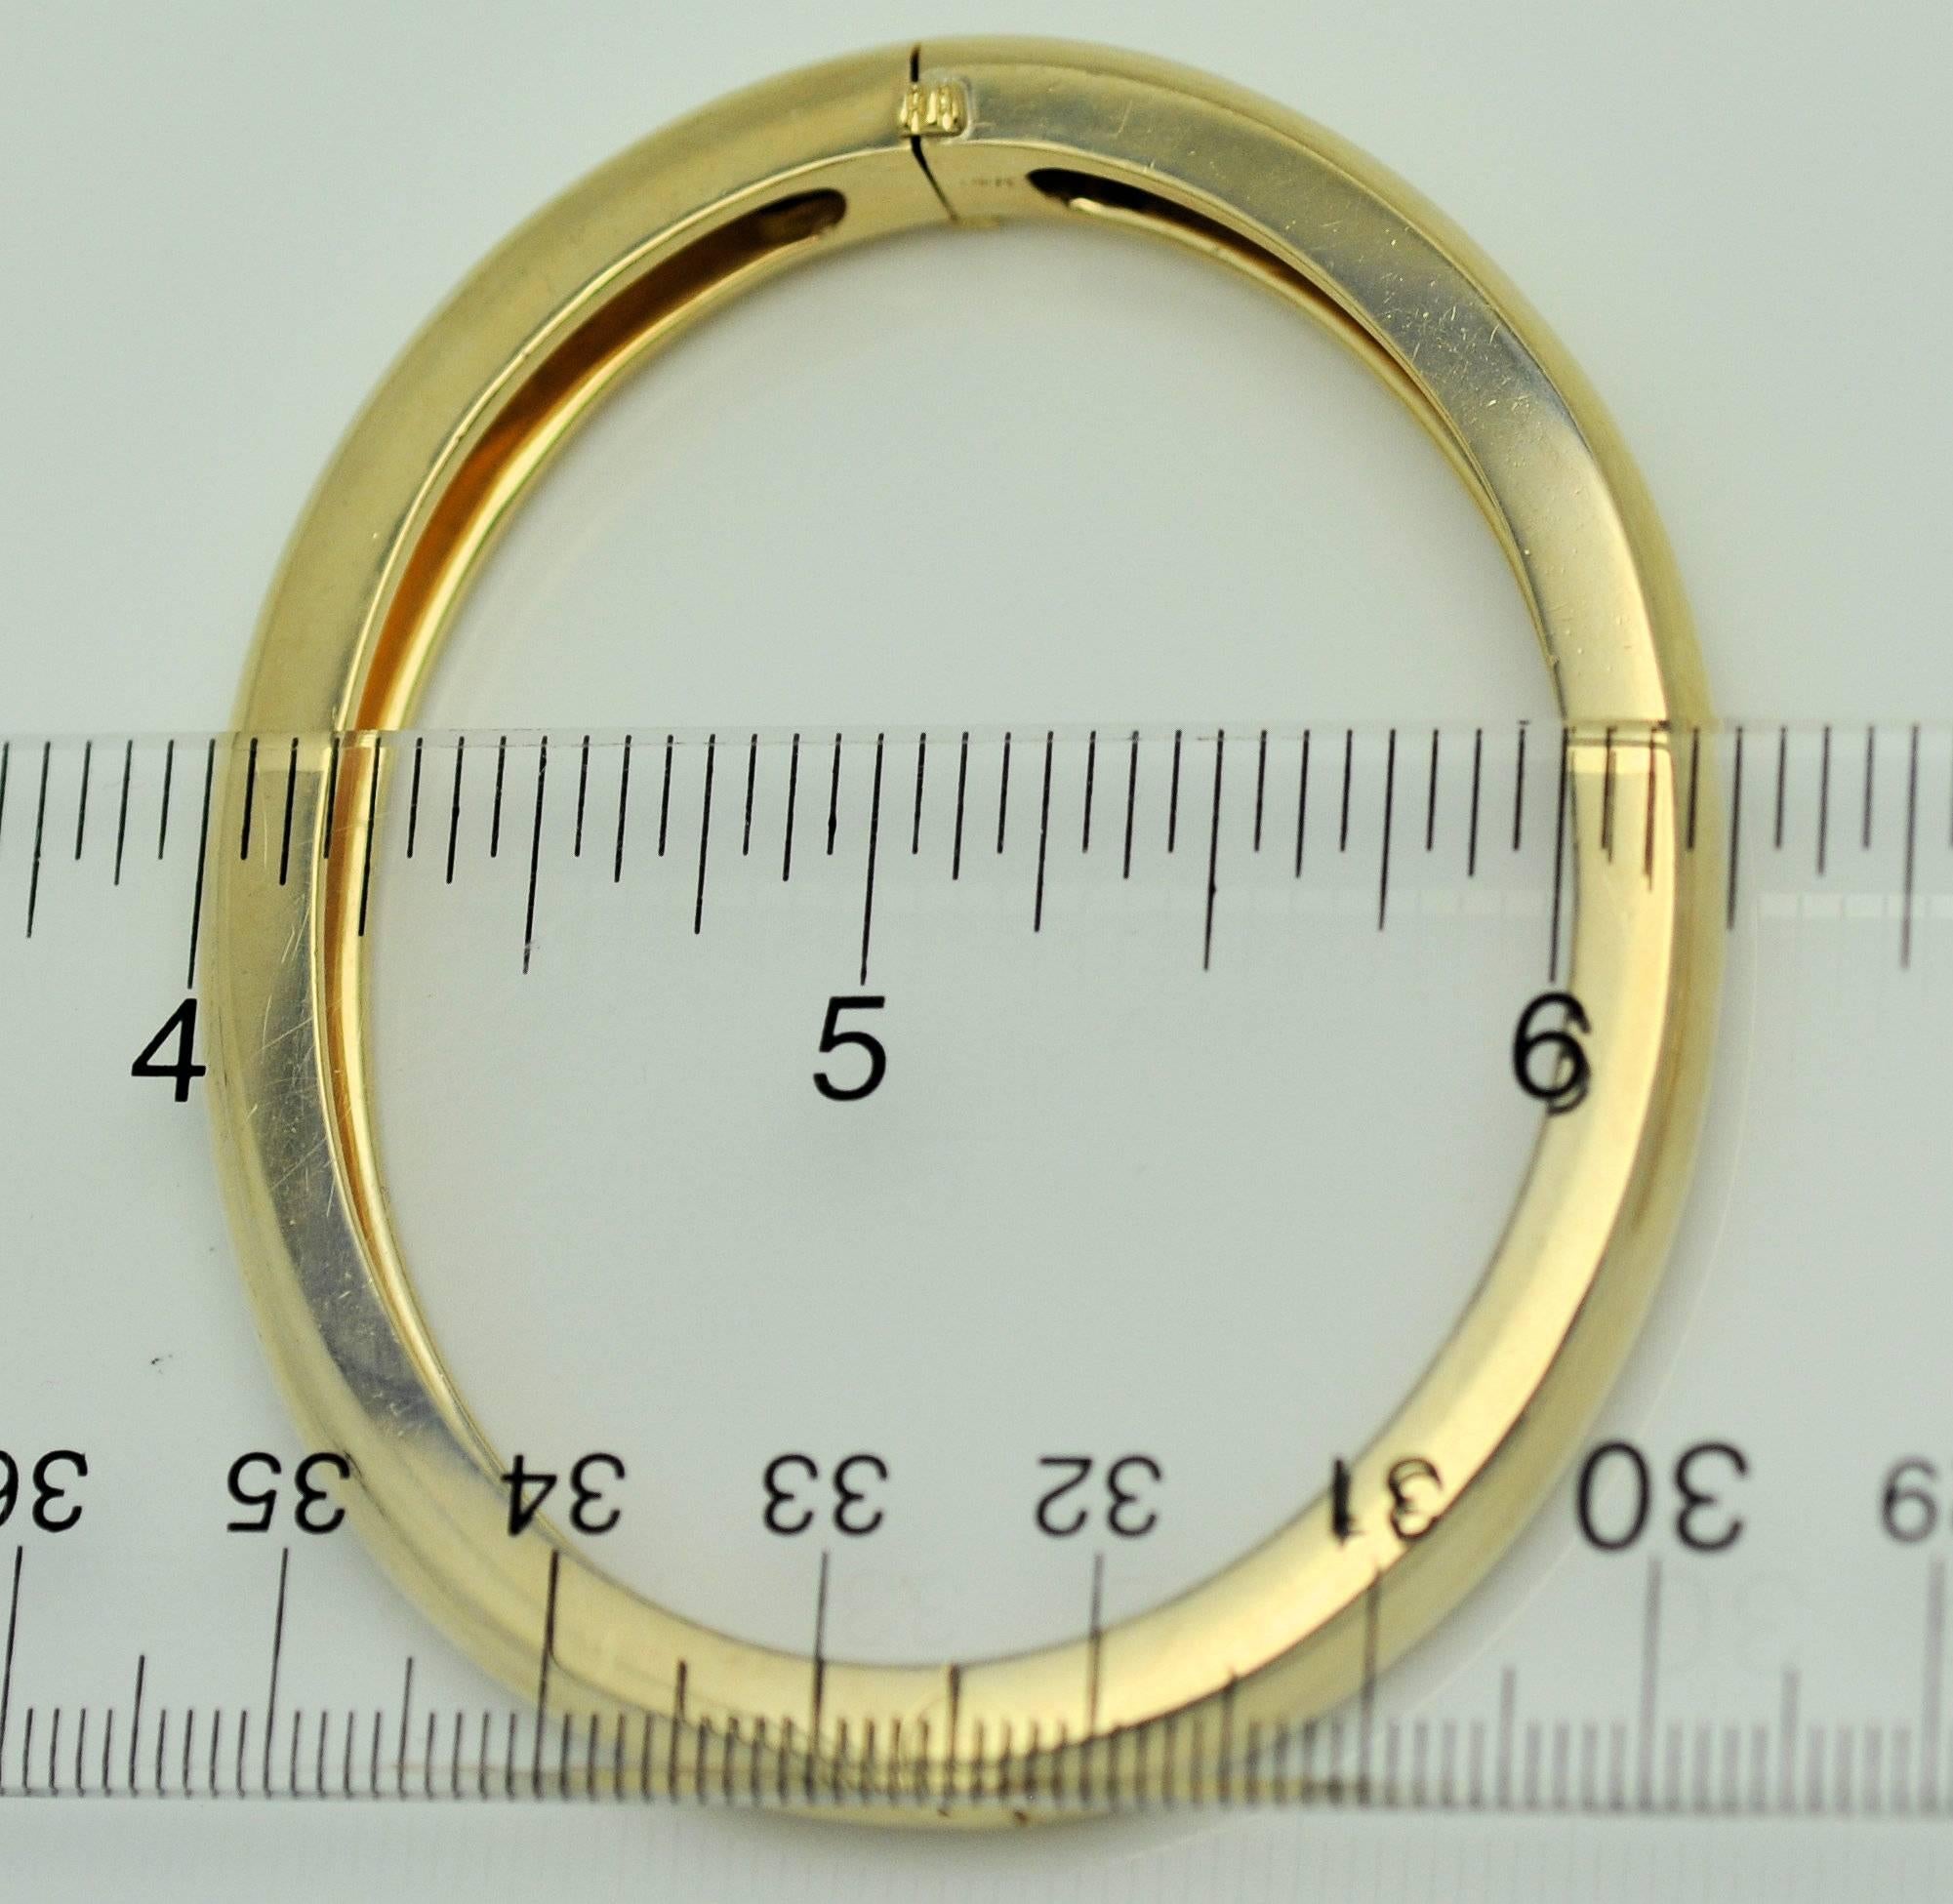 Pair of Classic Yellow Gold Hinged Bangle Bracelets For Sale 2